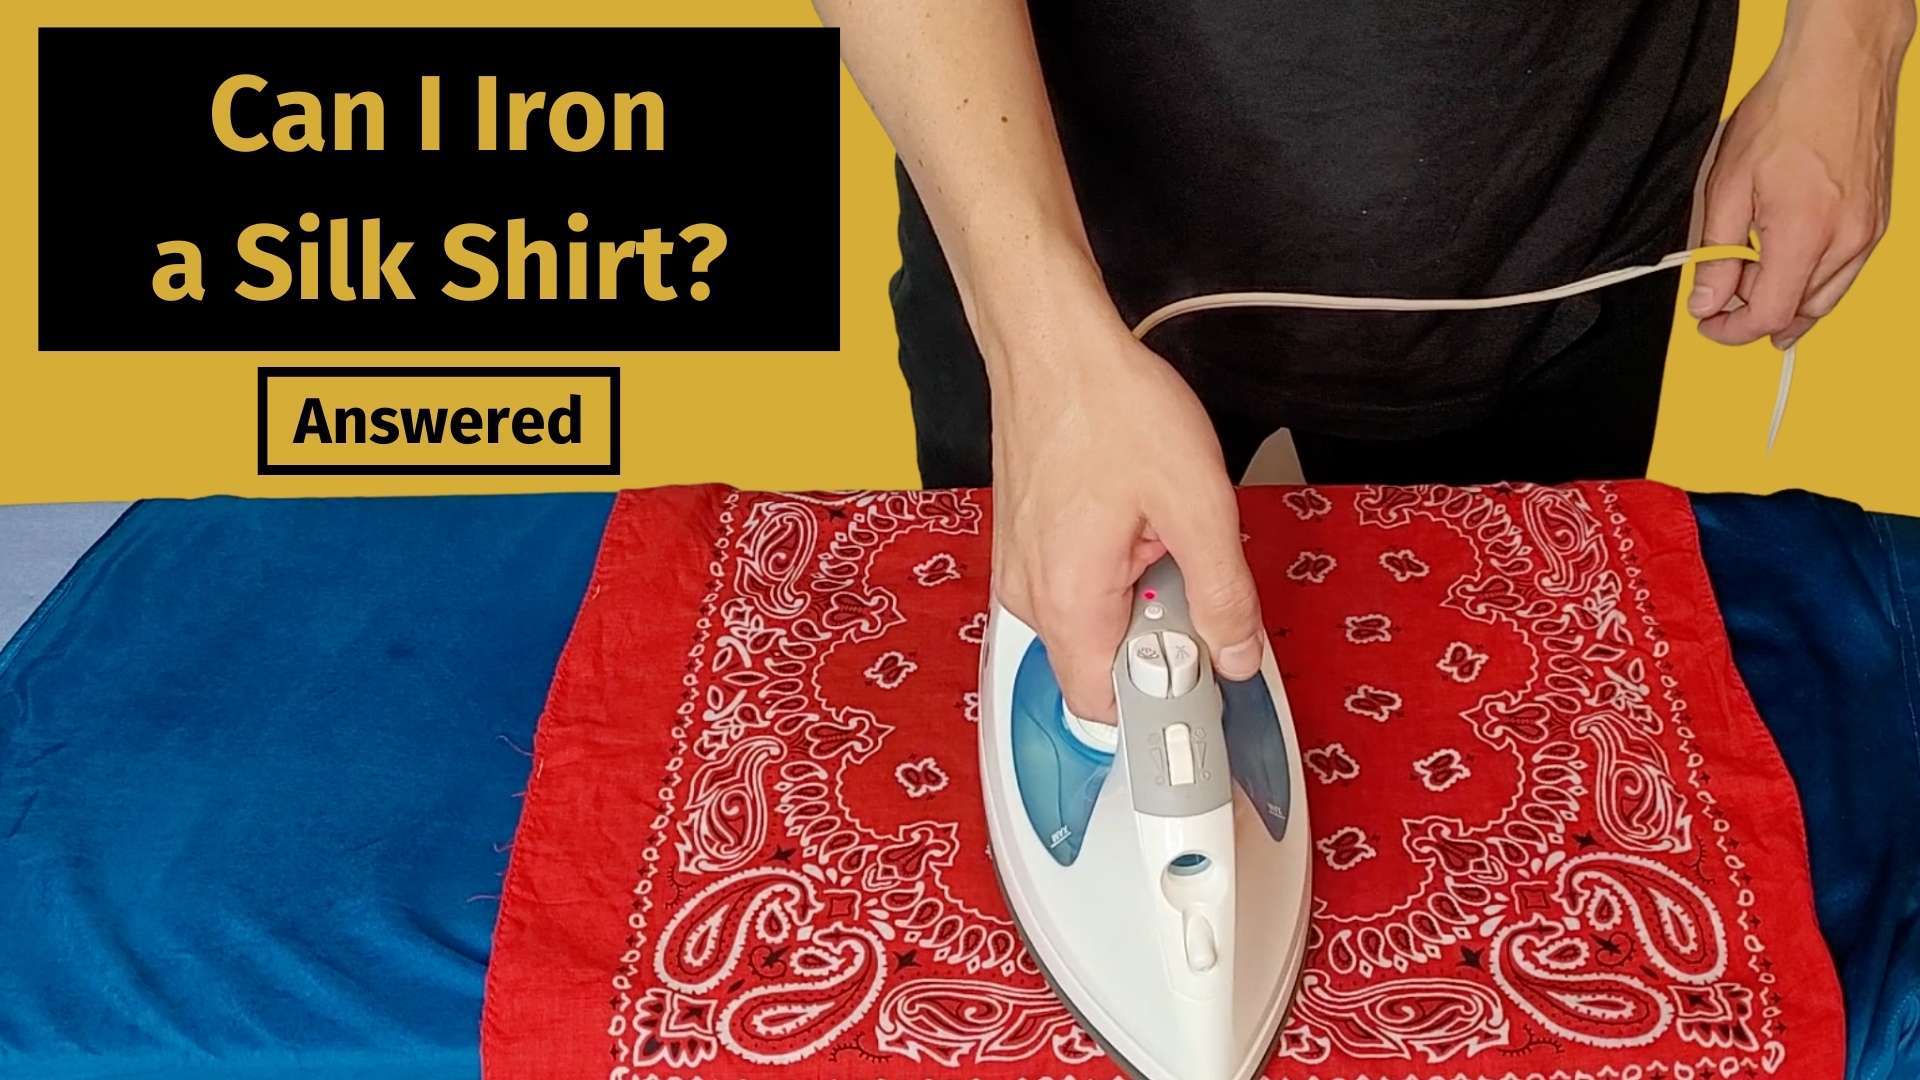 can i iron a silk shirt banner image with a man ironing a blue silk shirt on an ironing board